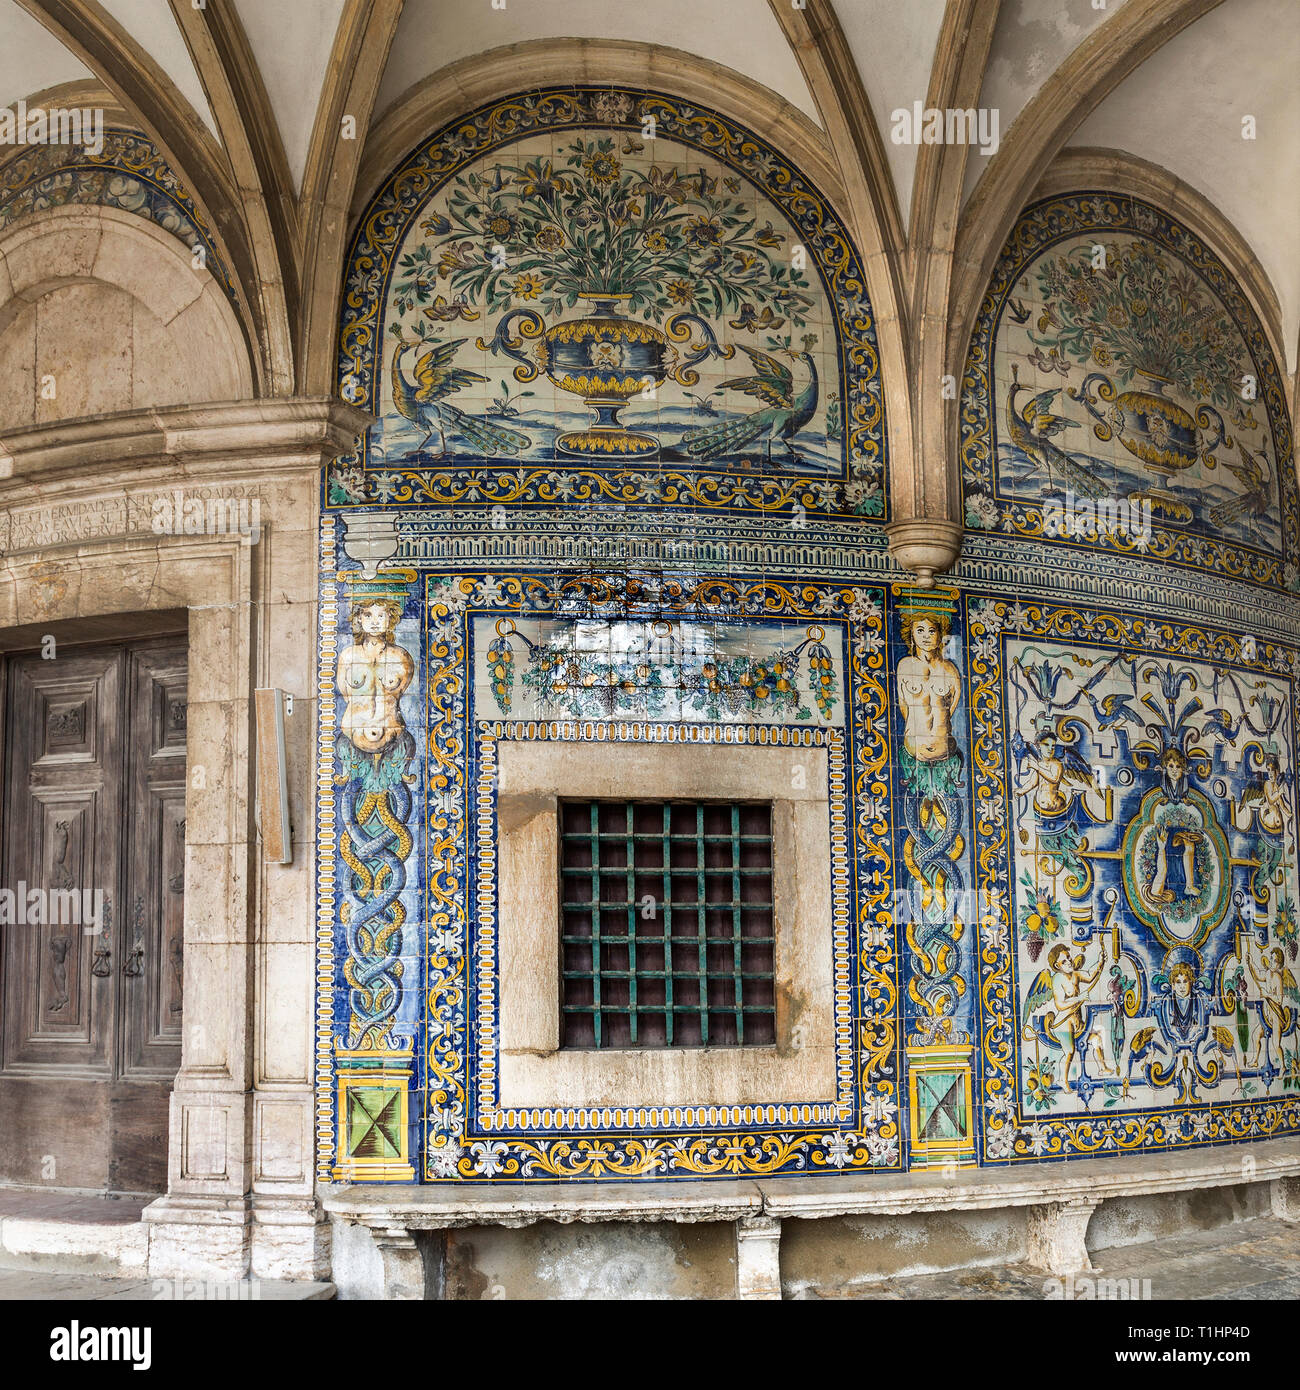 Detail of the 17th century polychromic tiles in mannerist style covering the walls of the front porch of the Chapel of Saint Amaro, in Lisbon, Portuga Stock Photo